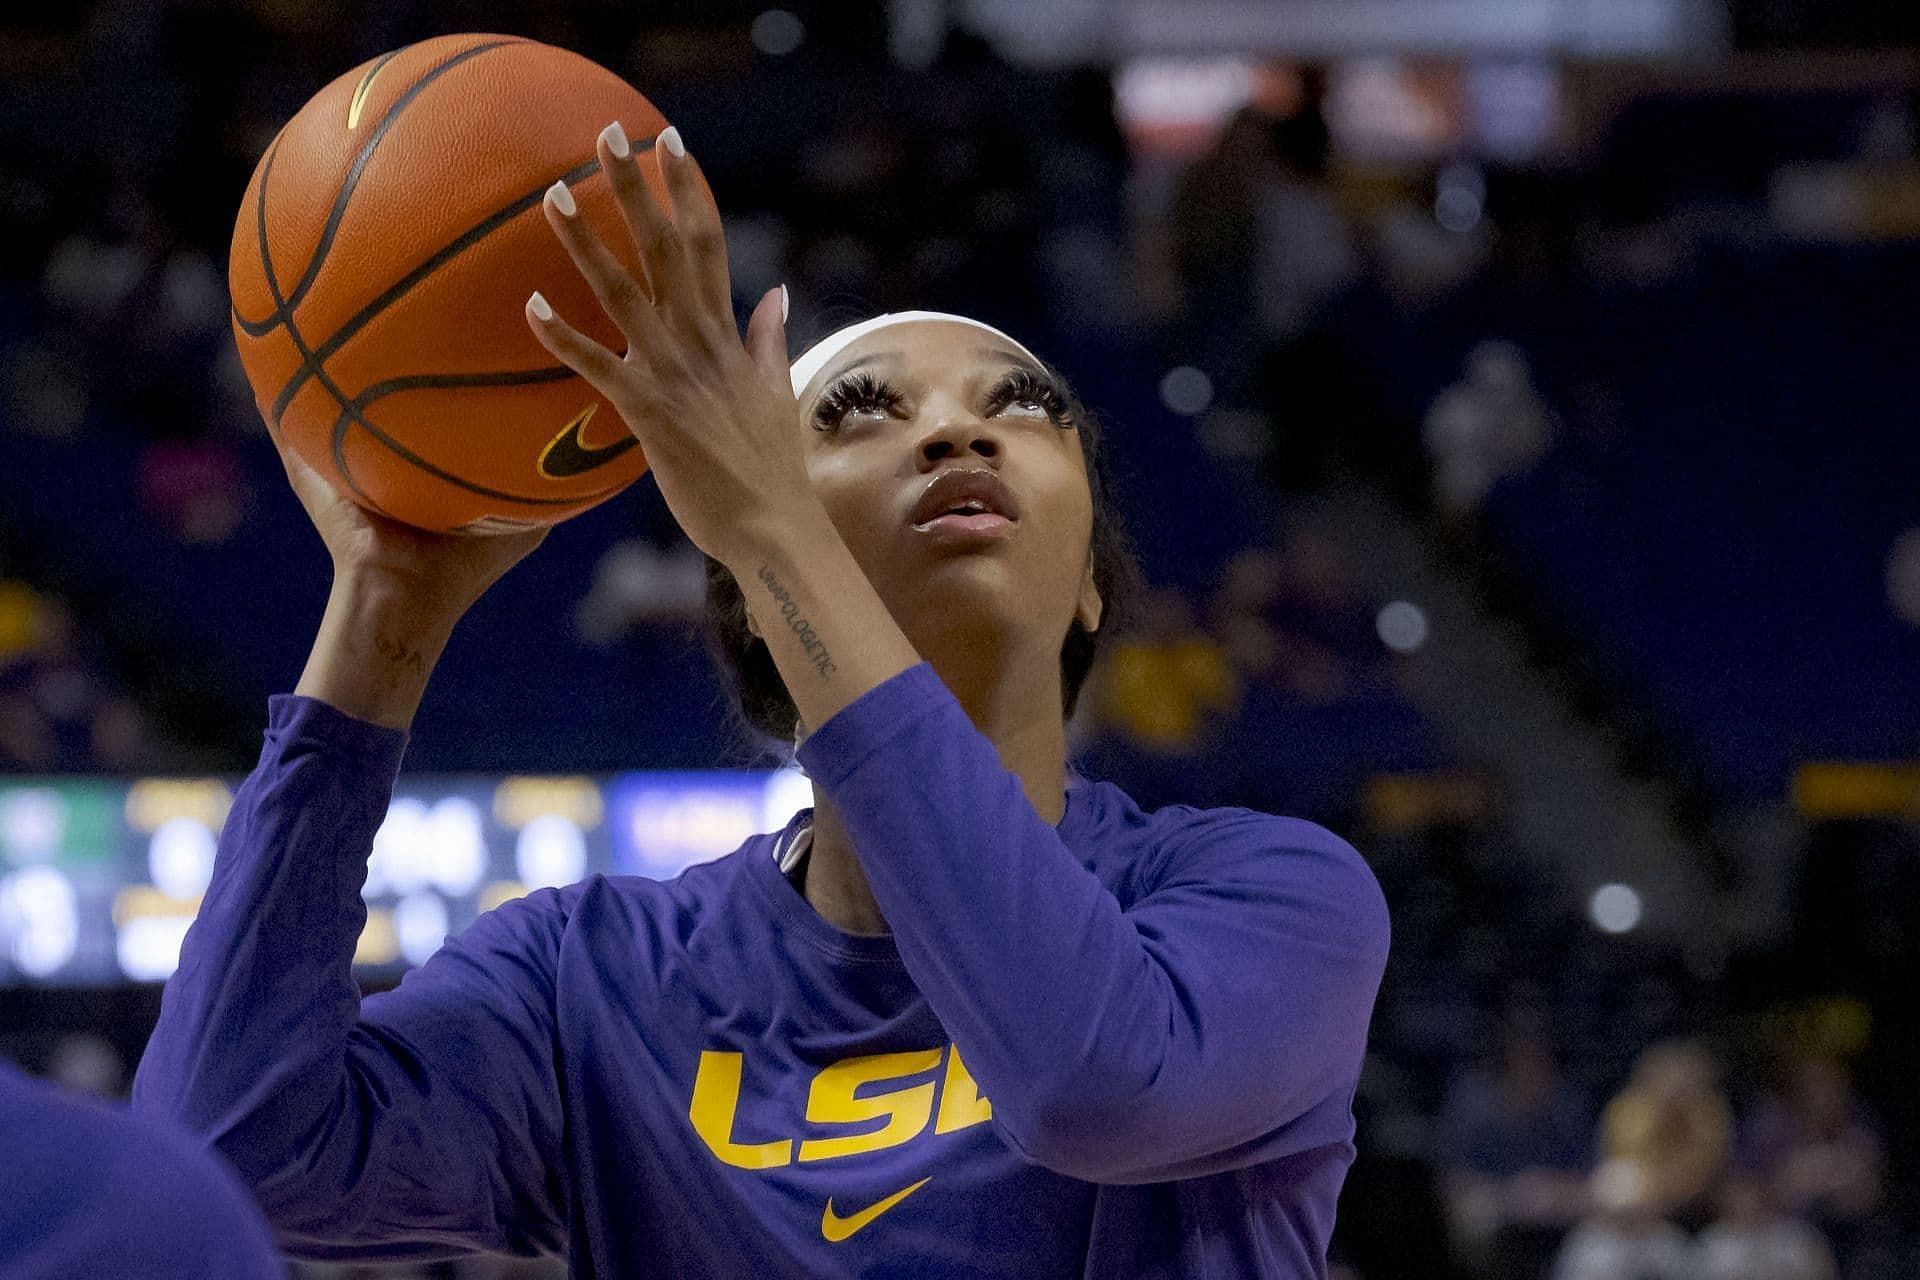 Angel Reese of the LSU Tigers Women